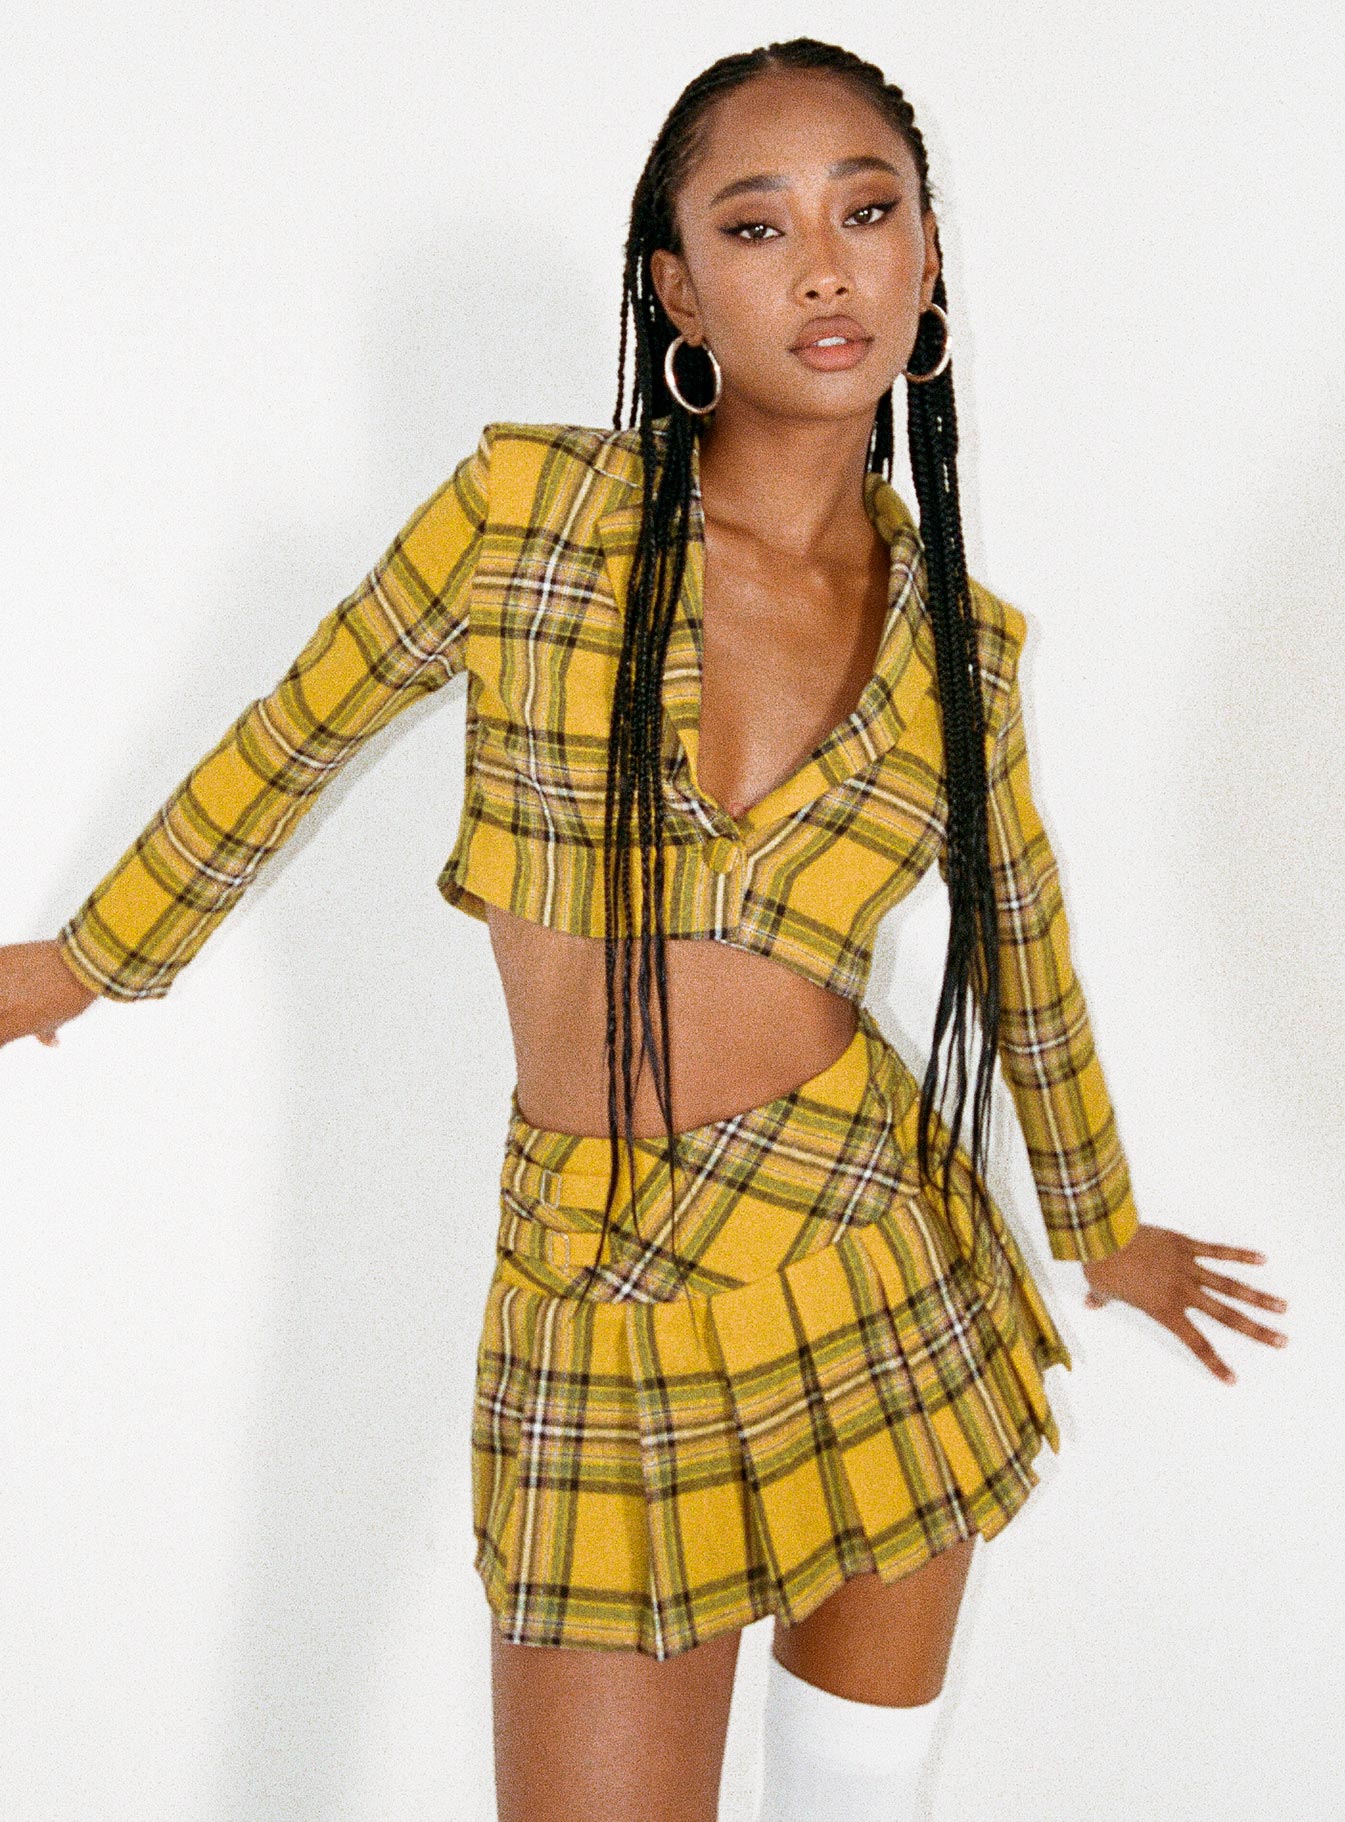 Summer Preppy Style Women's High Waist Plaid Skirt School Girl Uniform  Pleated Skirt Suit Skirt Outfit (Color : Yellow, Size : XL.) :  Amazon.co.uk: Fashion